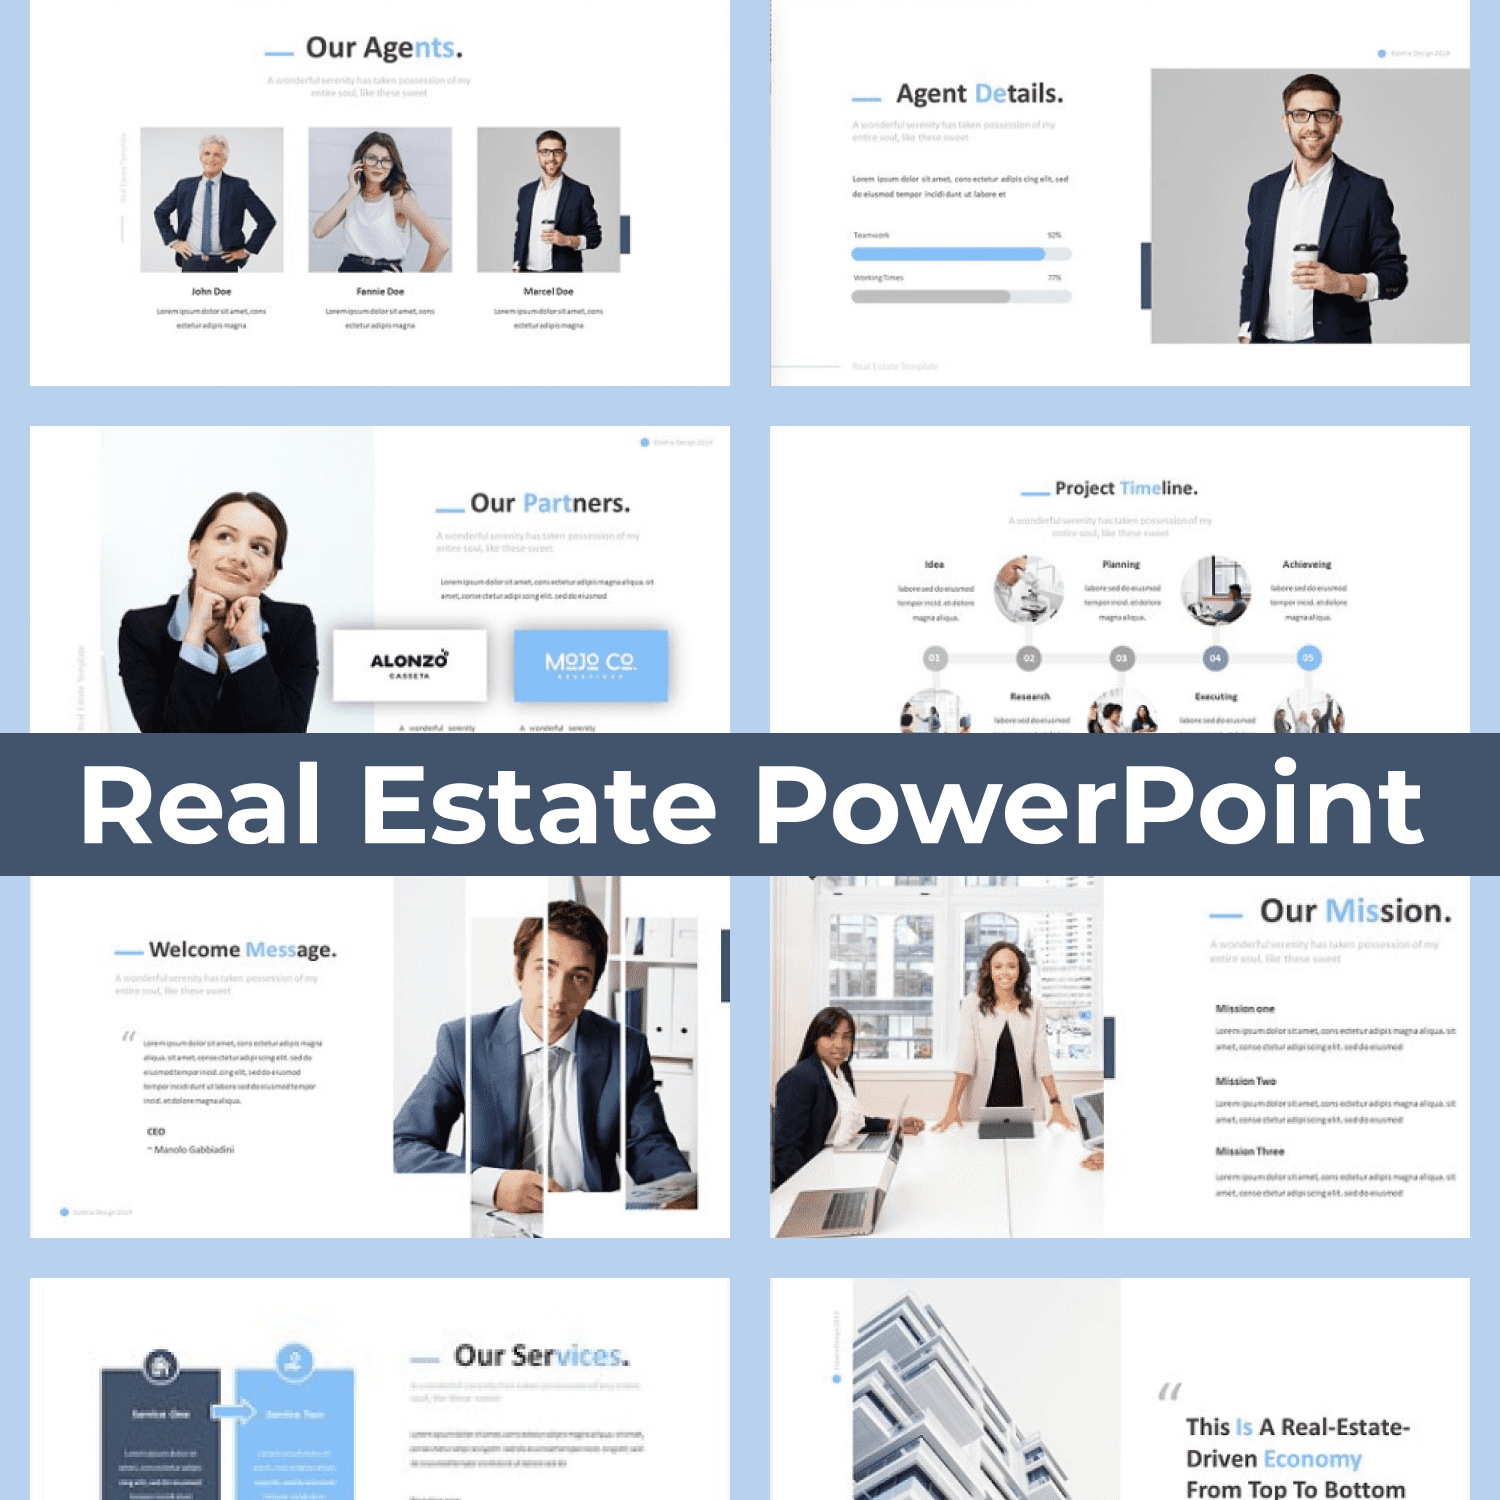 Real Estate Powerpoint Template by MasterBundles Collage Image.